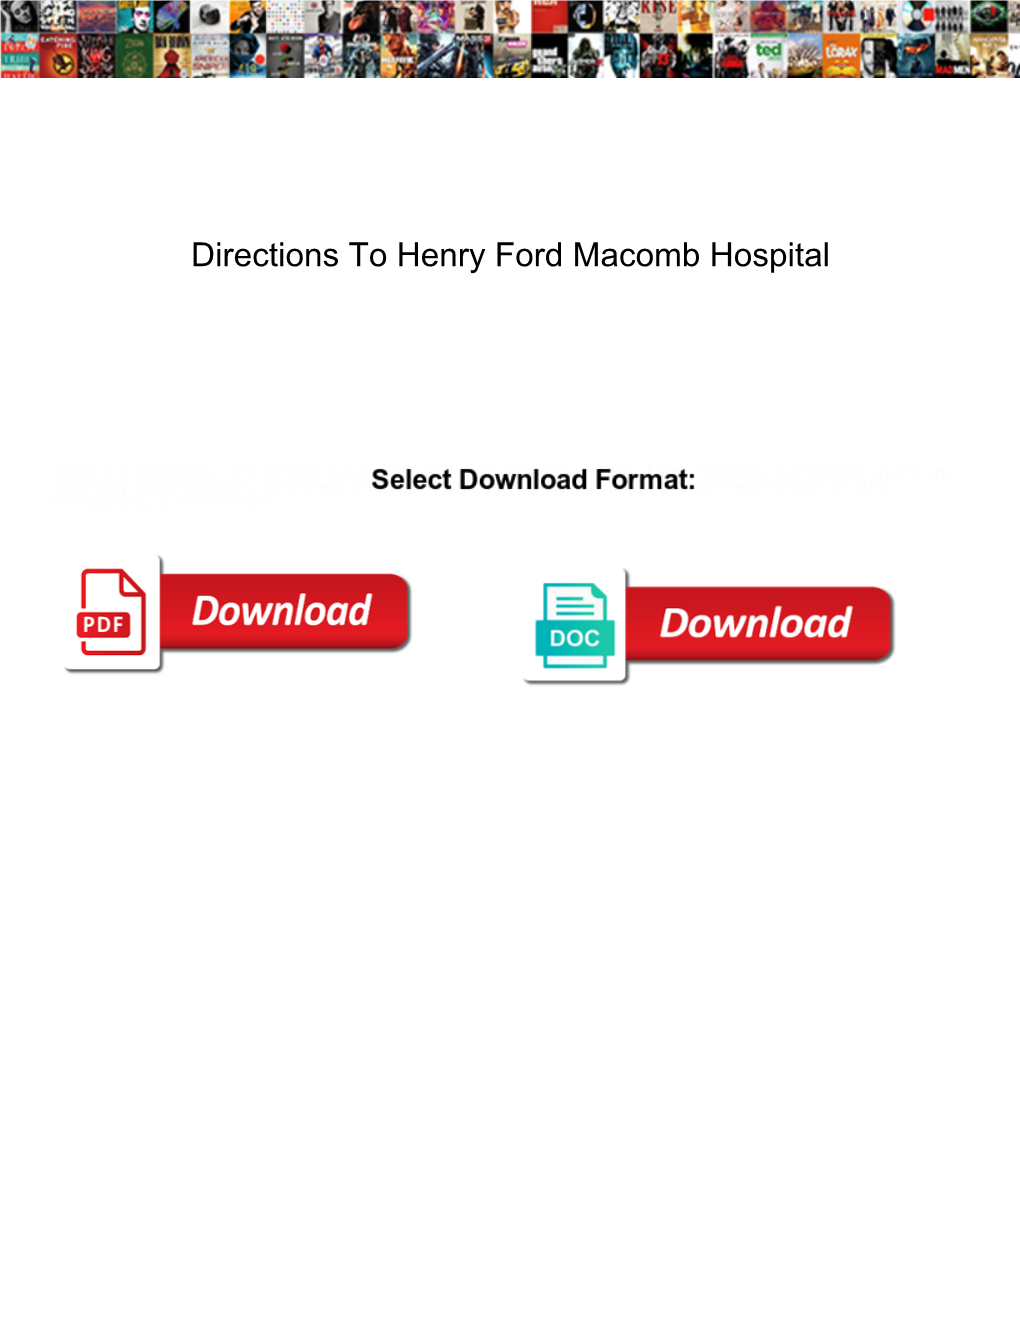 Directions to Henry Ford Macomb Hospital